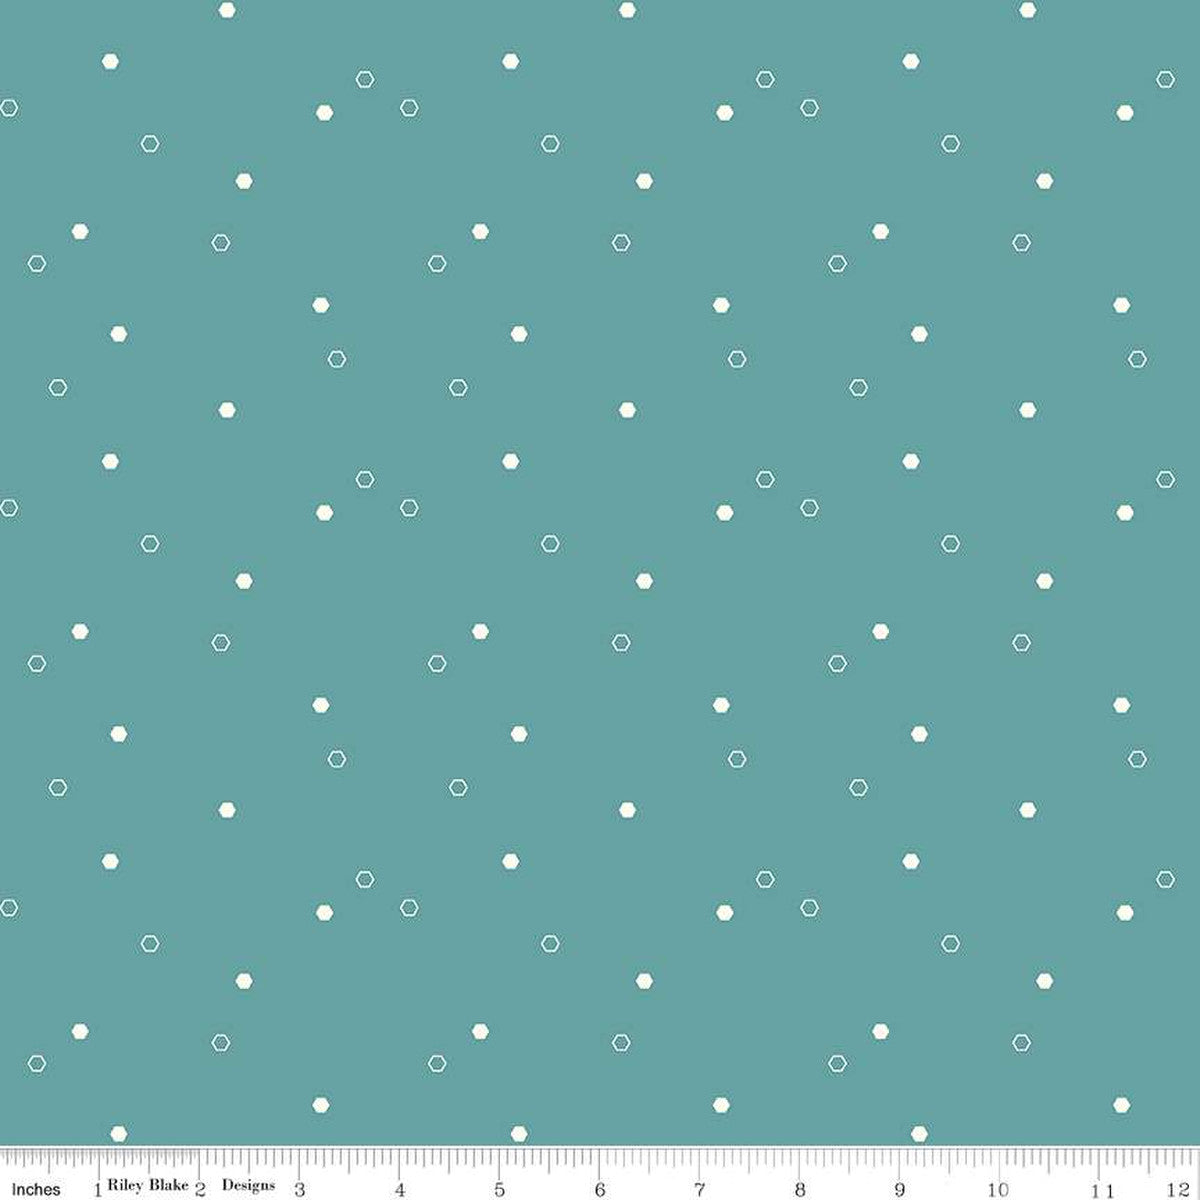 Dainty Fields Scattered Hexies in Teal by Beverly McCullough for Riley Blakes Designs basic fabric in teal with scattered  solid and outlined hexies hexagons cotton quilting sewing fabric material